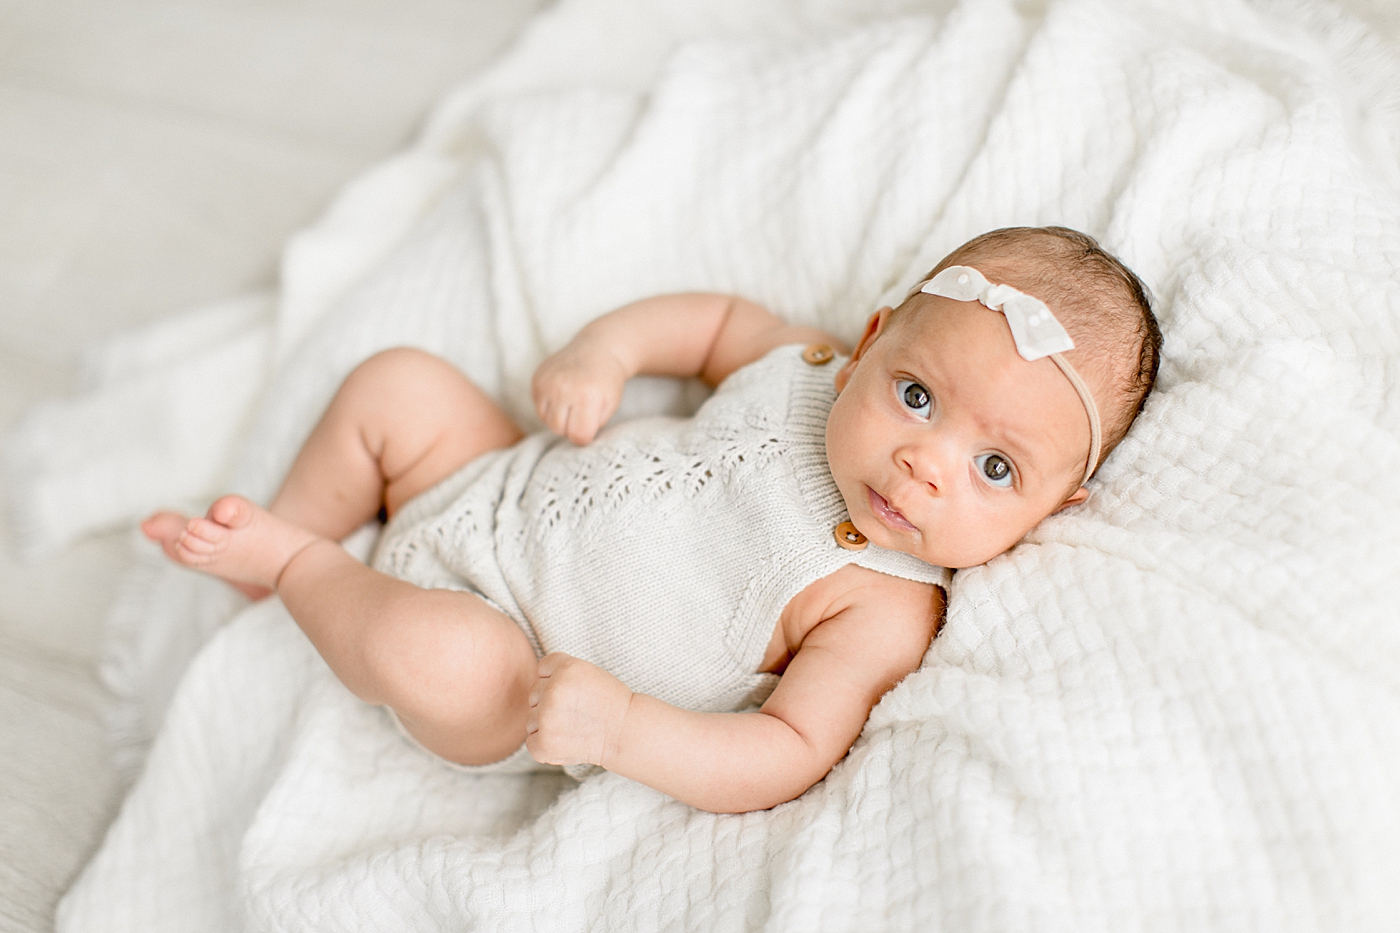 Newborn baby girl wide awake for photos with Brittany Elise Photography.